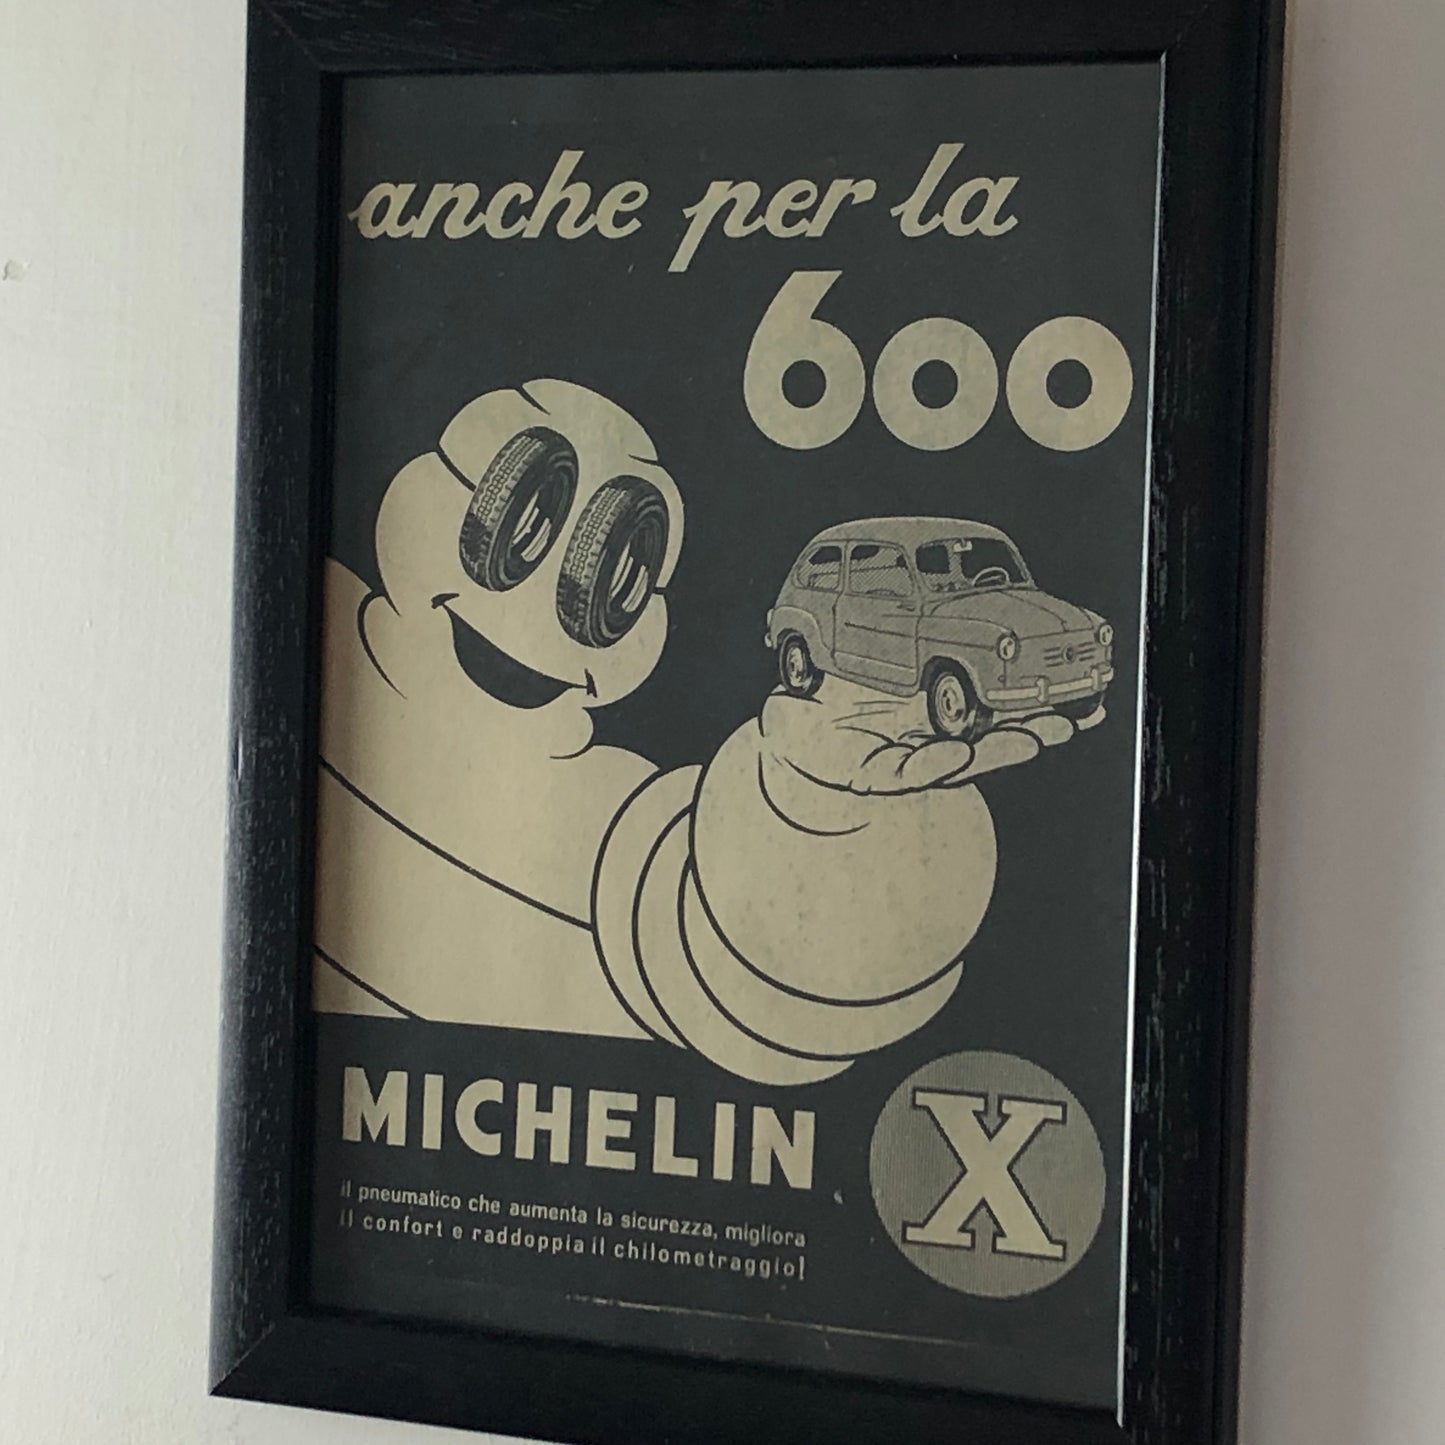 Michelin, 1960 Advertising Michelin X Tires for Fiat 600 with Italian Caption